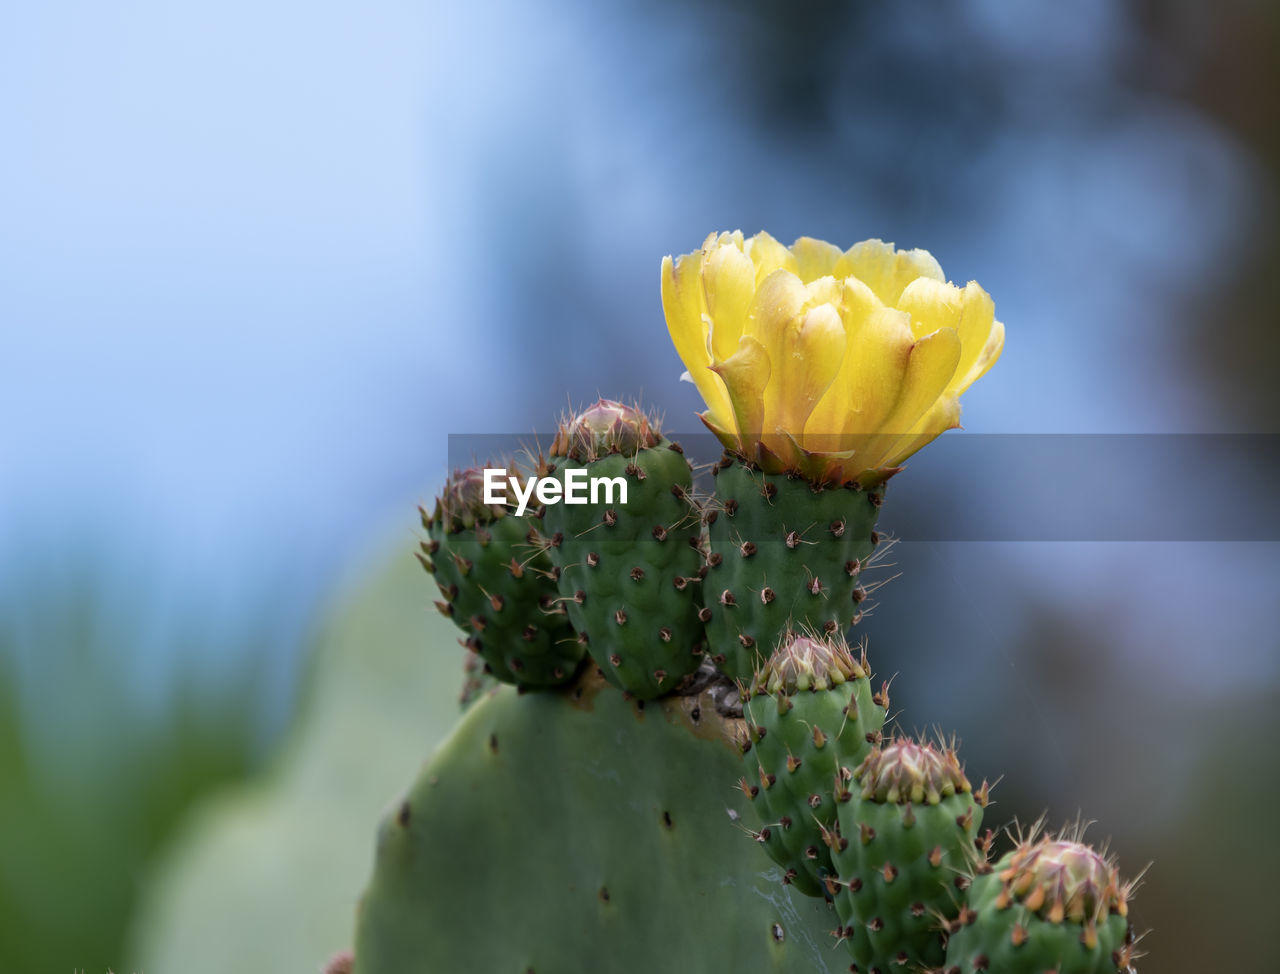 plant, nature, beauty in nature, flower, macro photography, green, flowering plant, prickly pear, close-up, cactus, yellow, growth, succulent plant, freshness, prickly pear cactus, no people, barbary fig, thorn, nopal, environment, thorns, spines, and prickles, plant stem, social issues, outdoors, environmental conservation, focus on foreground, wildflower, land, springtime, botany, eastern prickly pear, sky, leaf, landscape, day, flower head, bud, fragility, blossom, inflorescence, food and drink, selective focus, food, scenics - nature, tranquility, sunlight, travel, travel destinations, plant part, macro